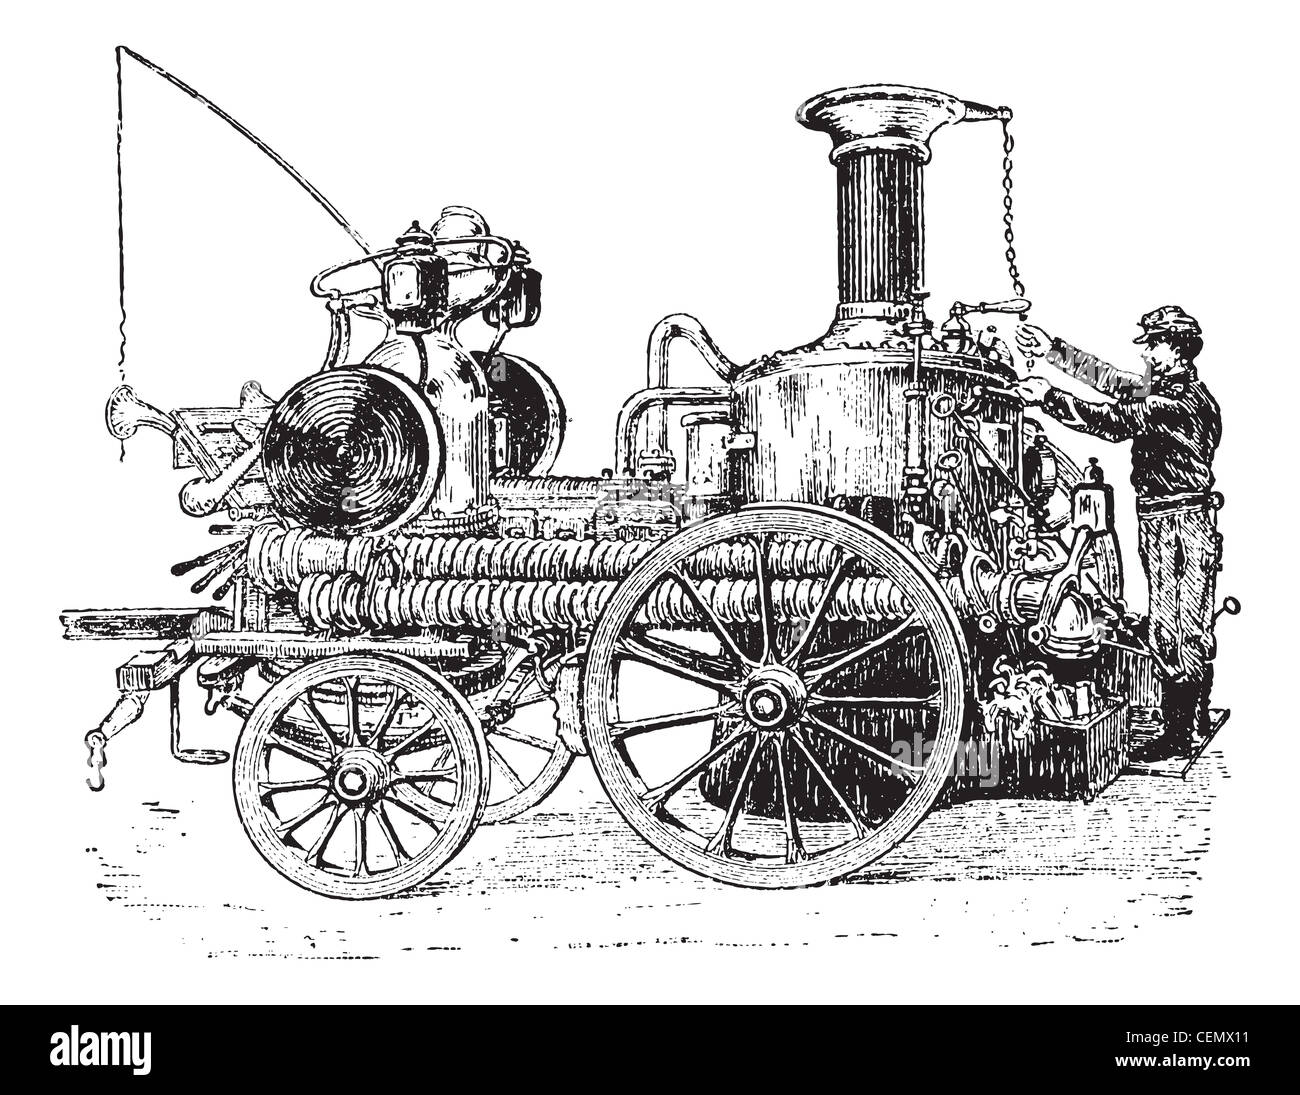 https://c8.alamy.com/comp/CEMX11/old-engraved-illustration-of-steam-pump-on-carriage-it-is-used-against-CEMX11.jpg